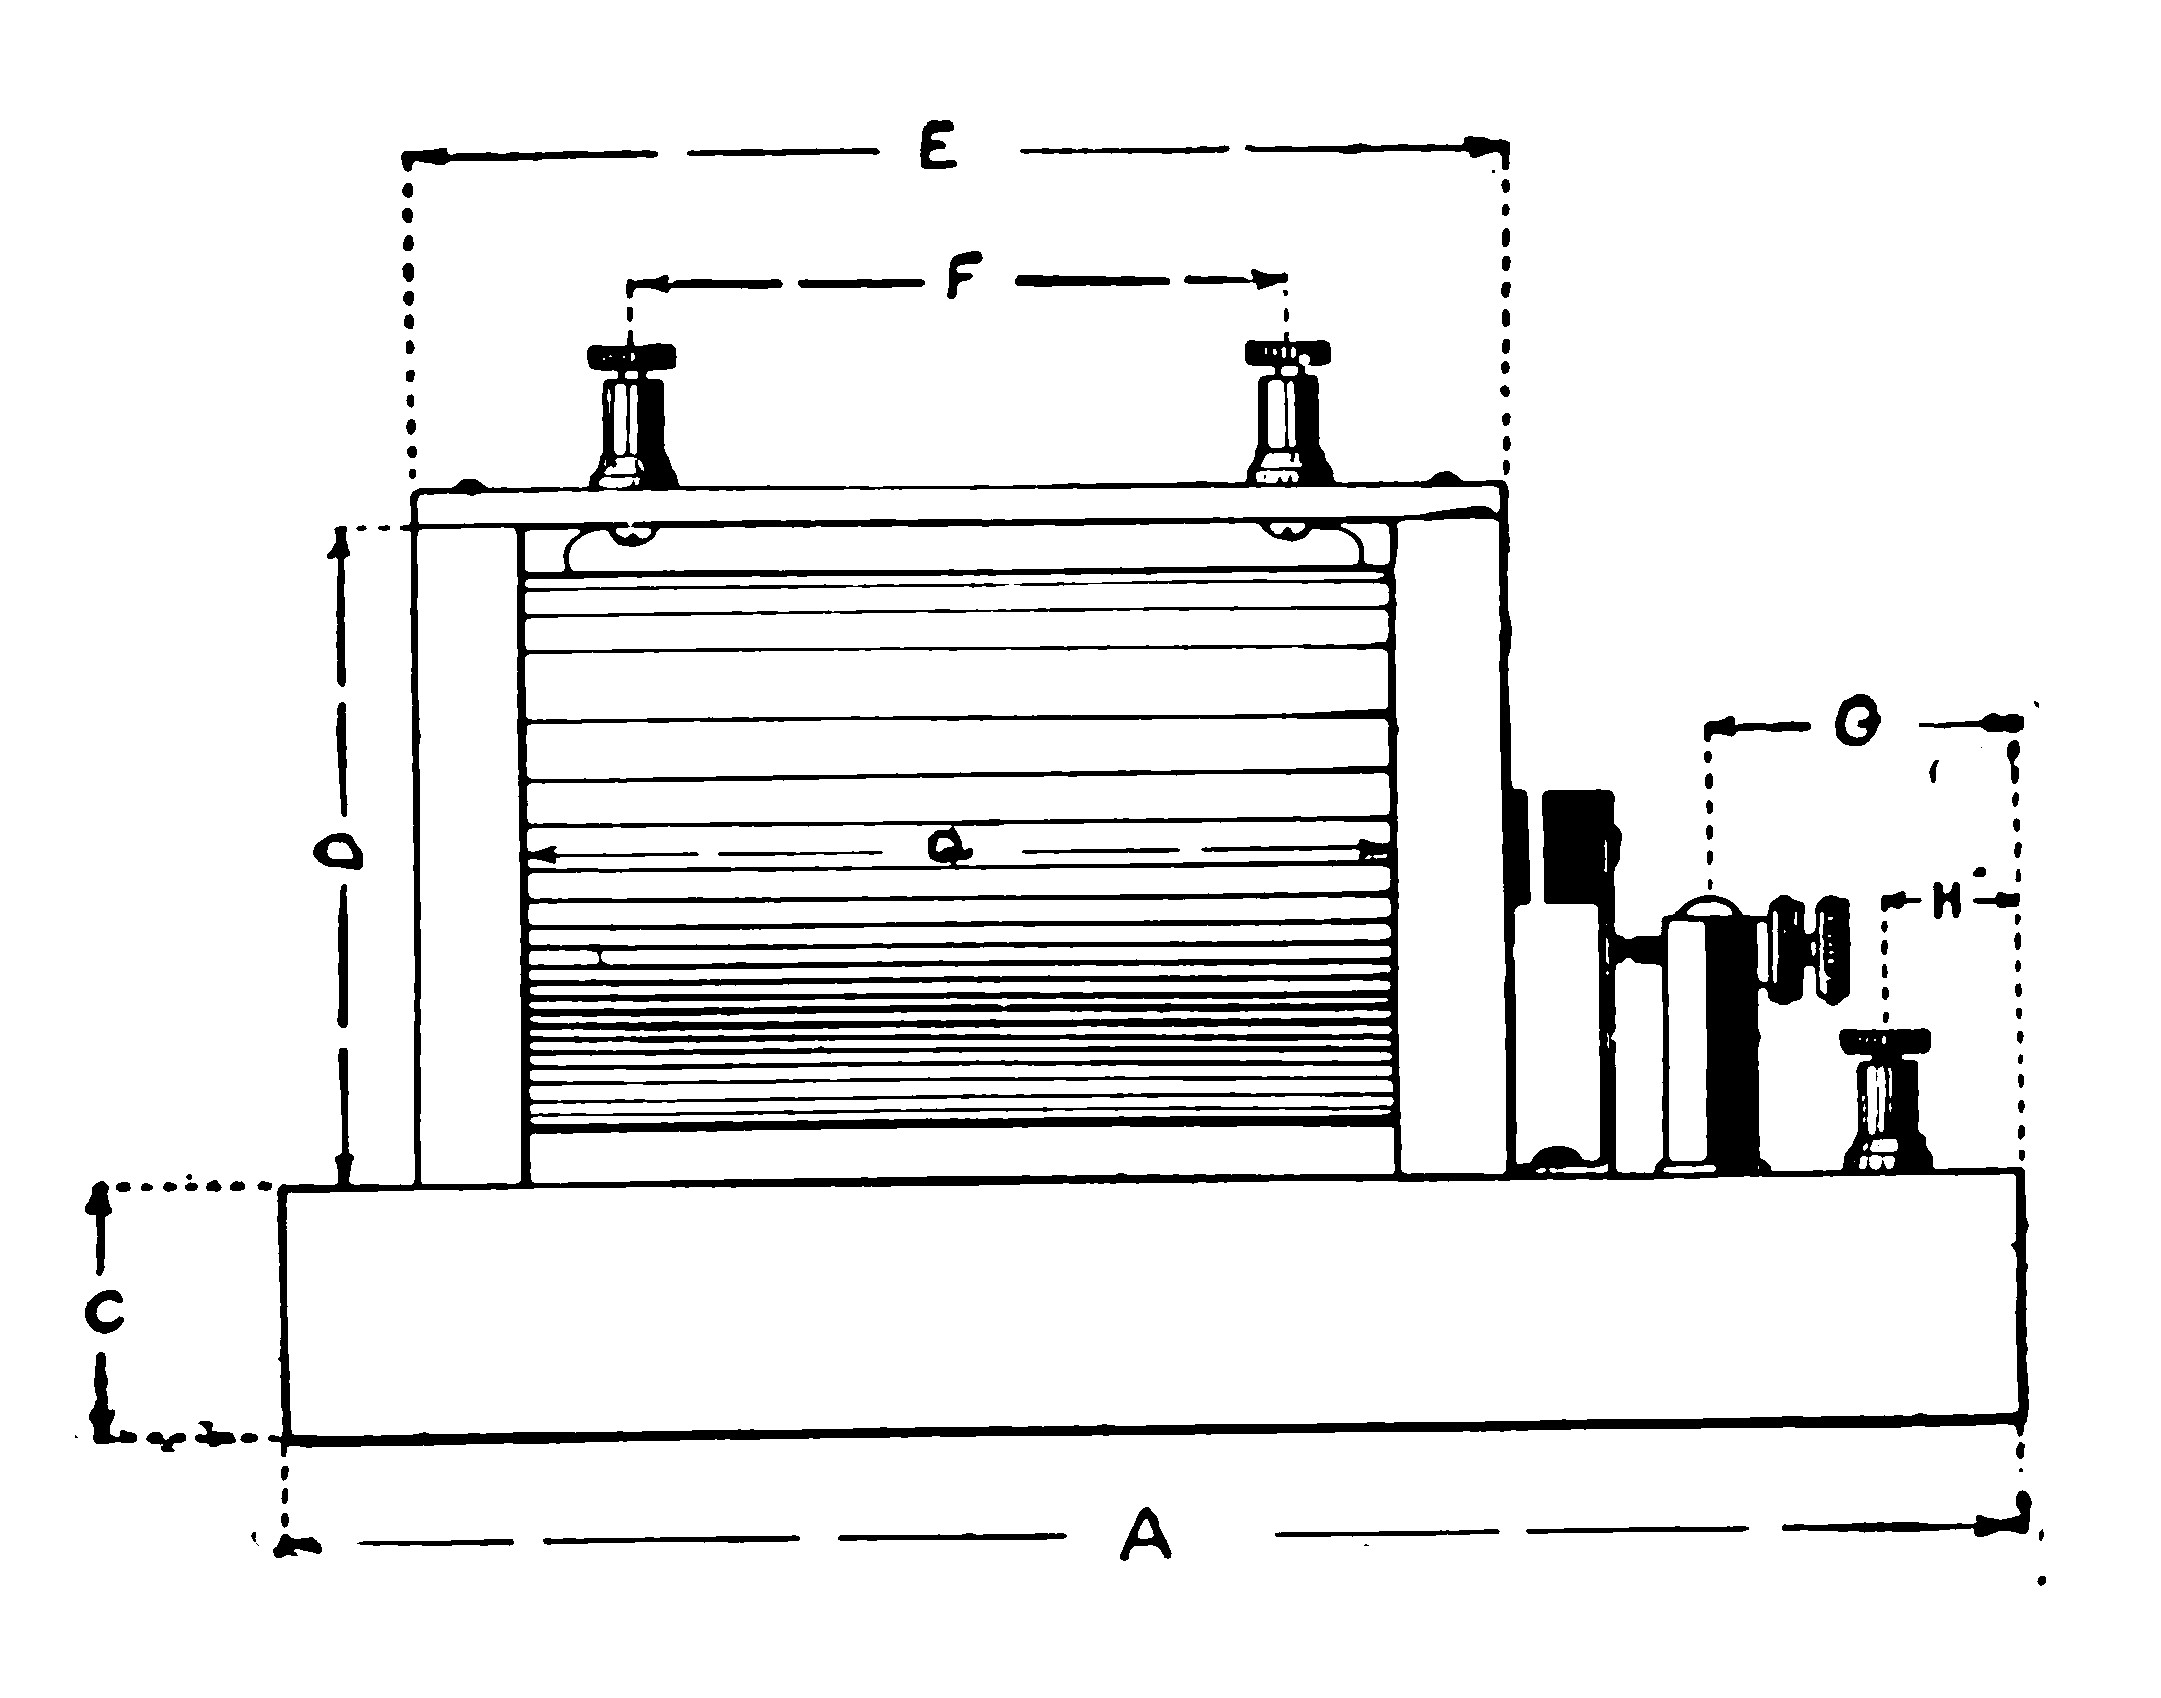 FIG. 120.—Side View of the Completed Coil.